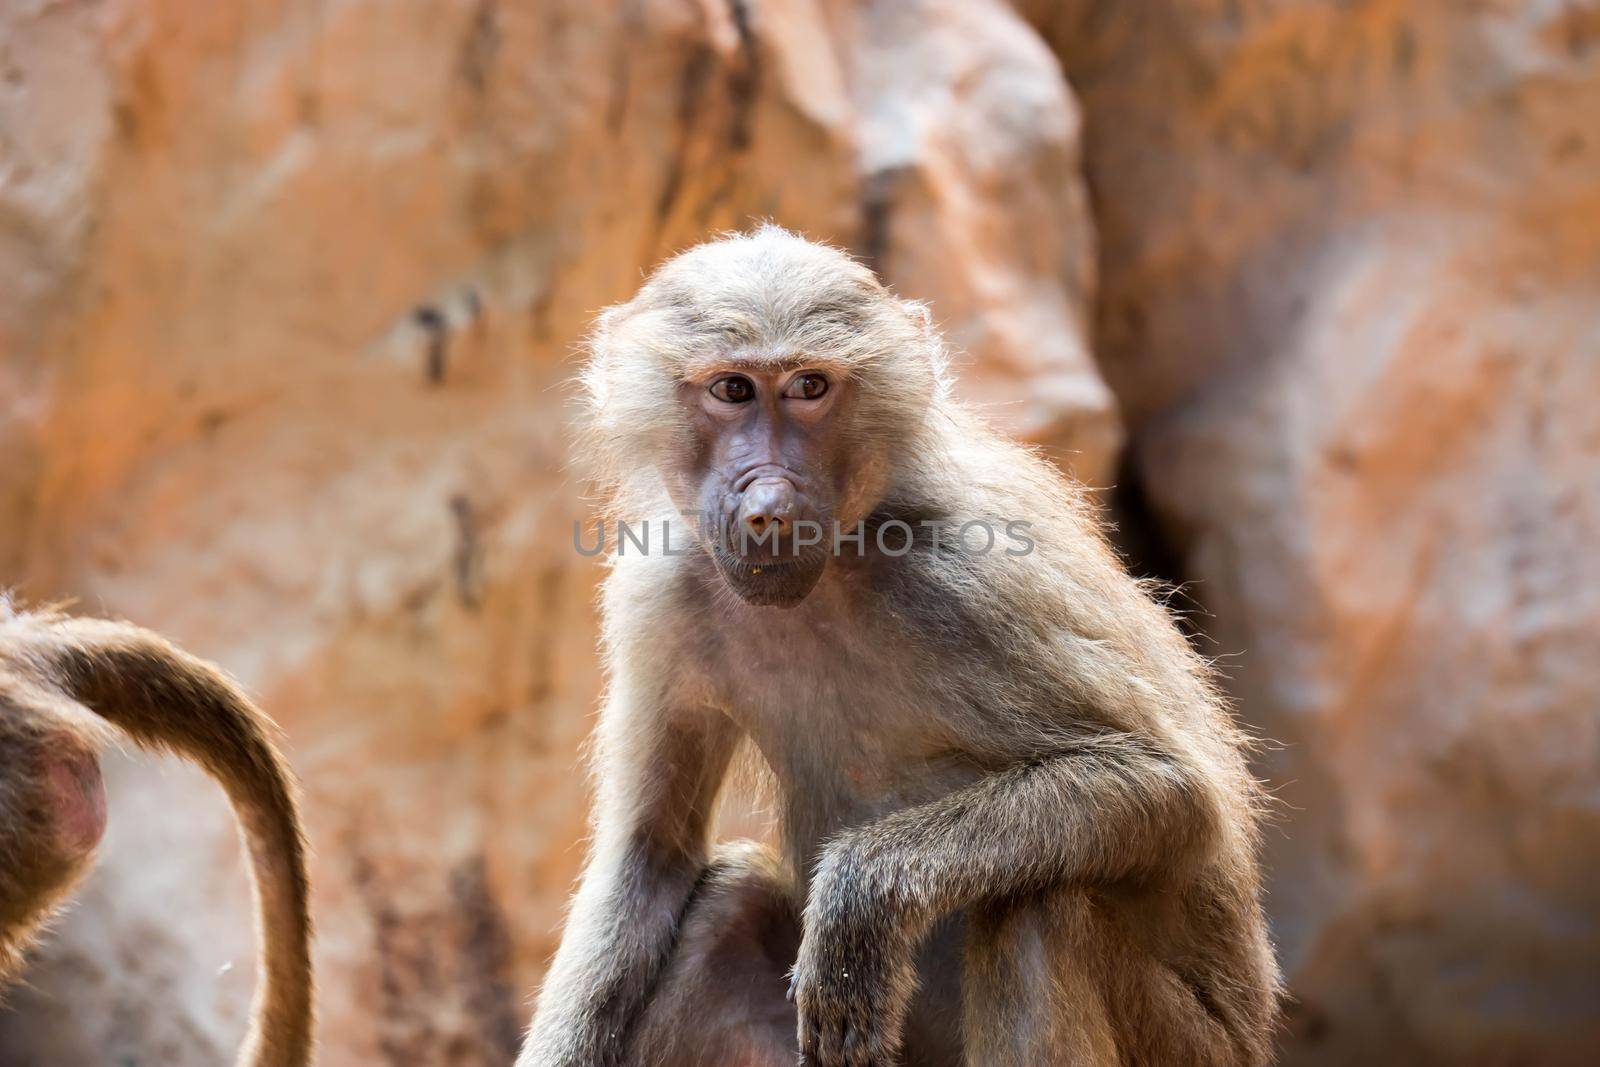 Hamadryas baboon sitting and observing in a zoo in Singapore